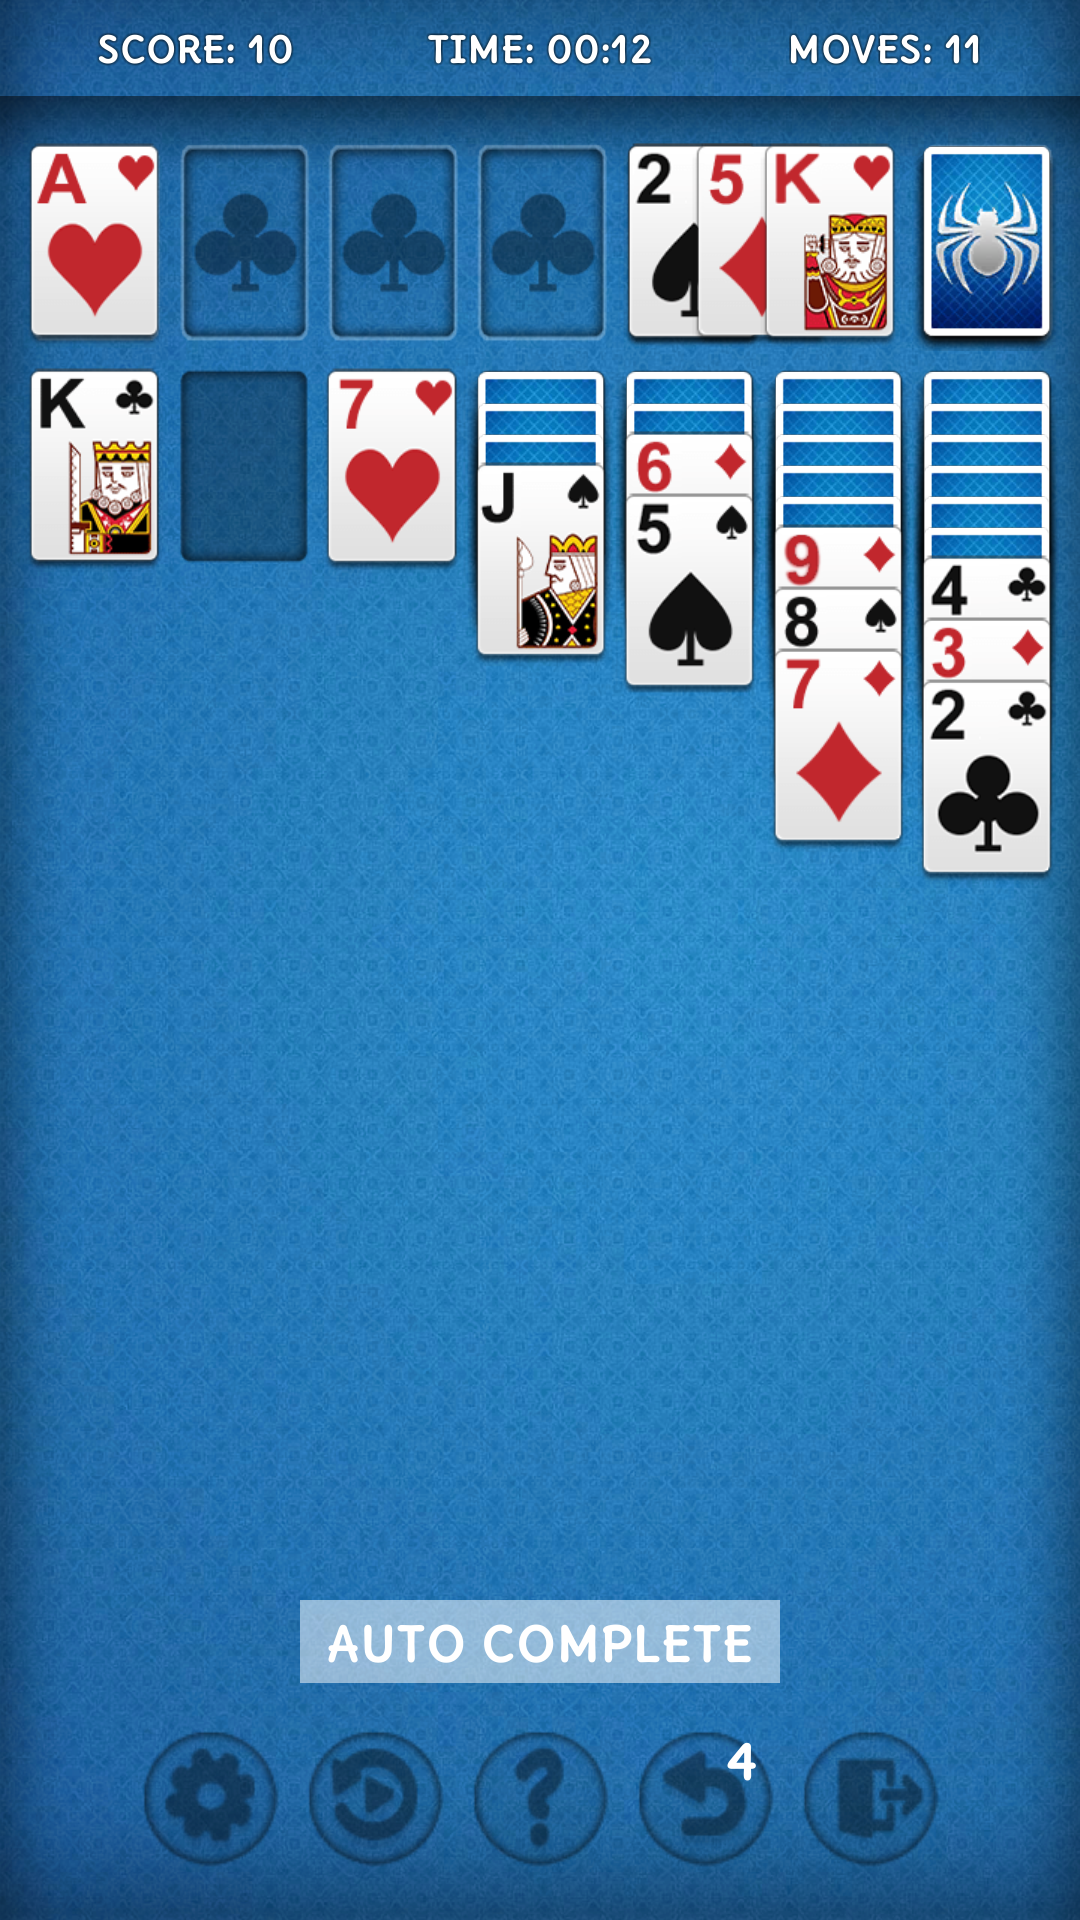 CardKing Solitaire screenshot game